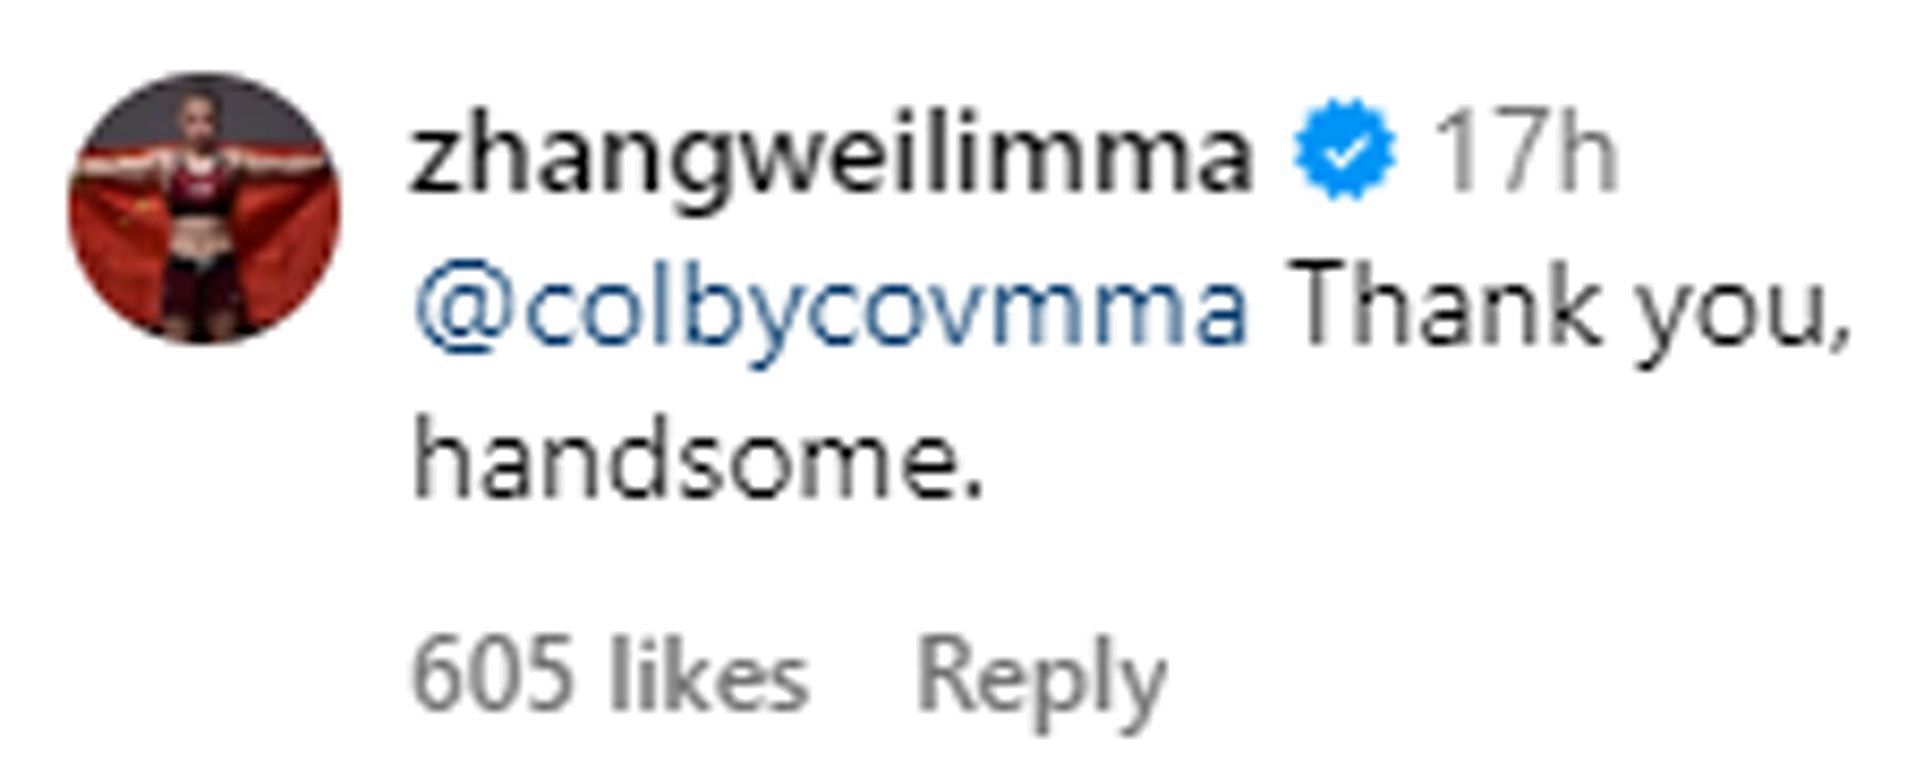 Weili responded with a friendly message to Covington